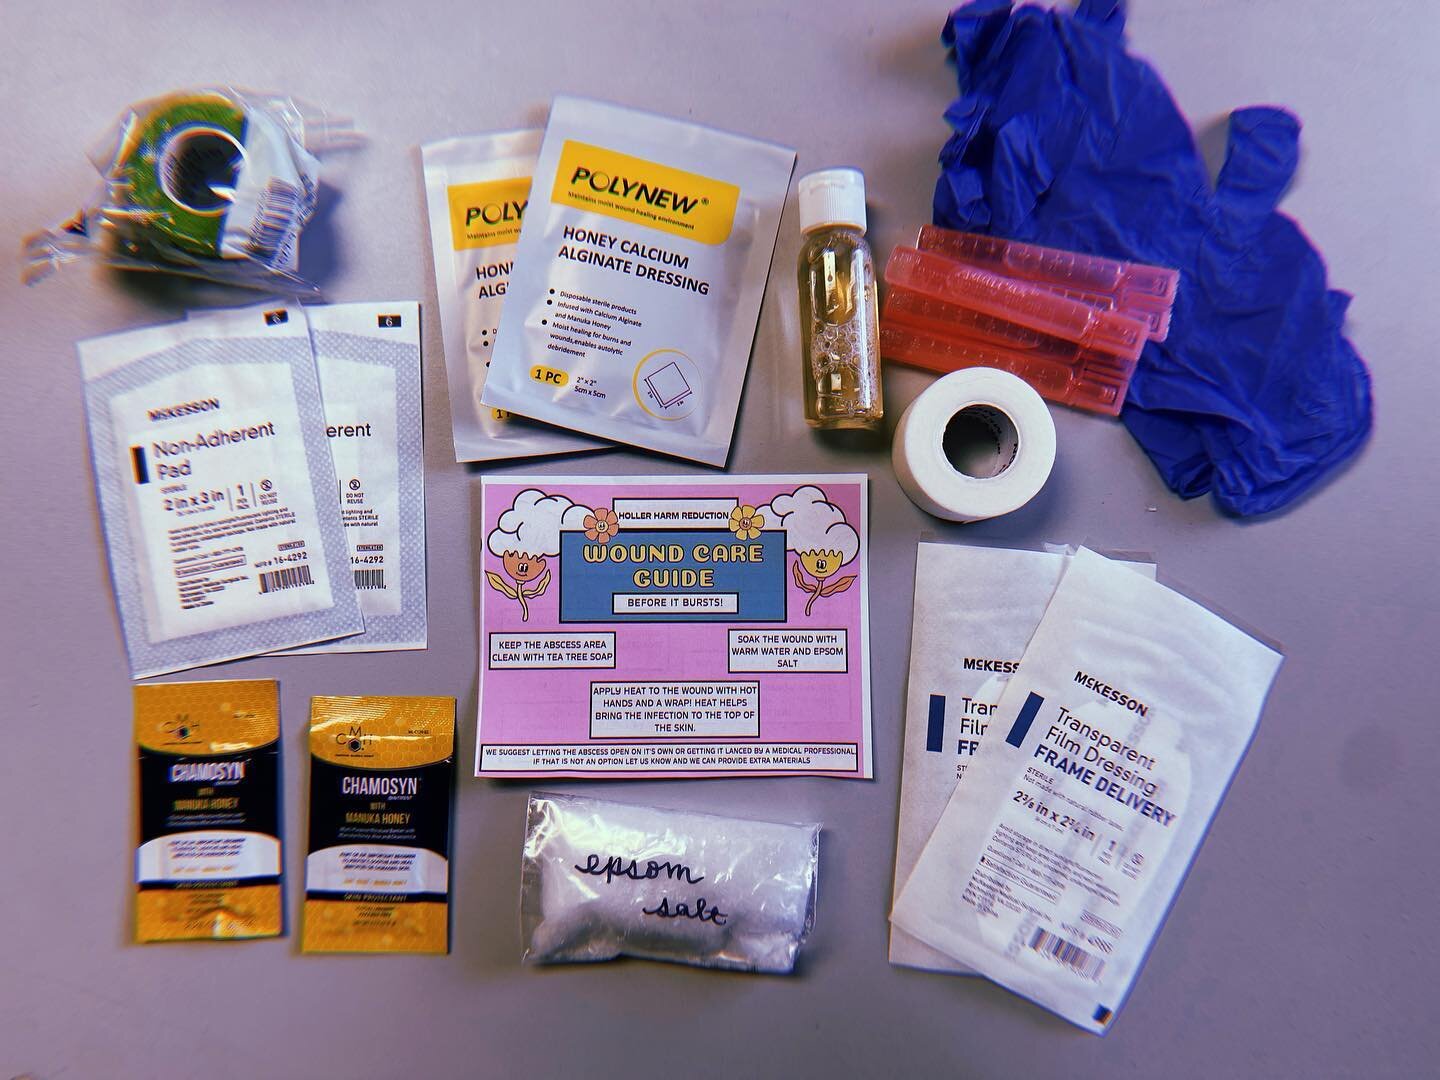 When you bundle, you save (lives)! 

It&rsquo;s no secret we love kits and spend a lot of time putting these together. 
1. Wound Care: heat packs, tea tree soap, epsom salt, saline, gauze, alginate dressing, Manuka honey, &amp; gloves
2. Snort Pack: 